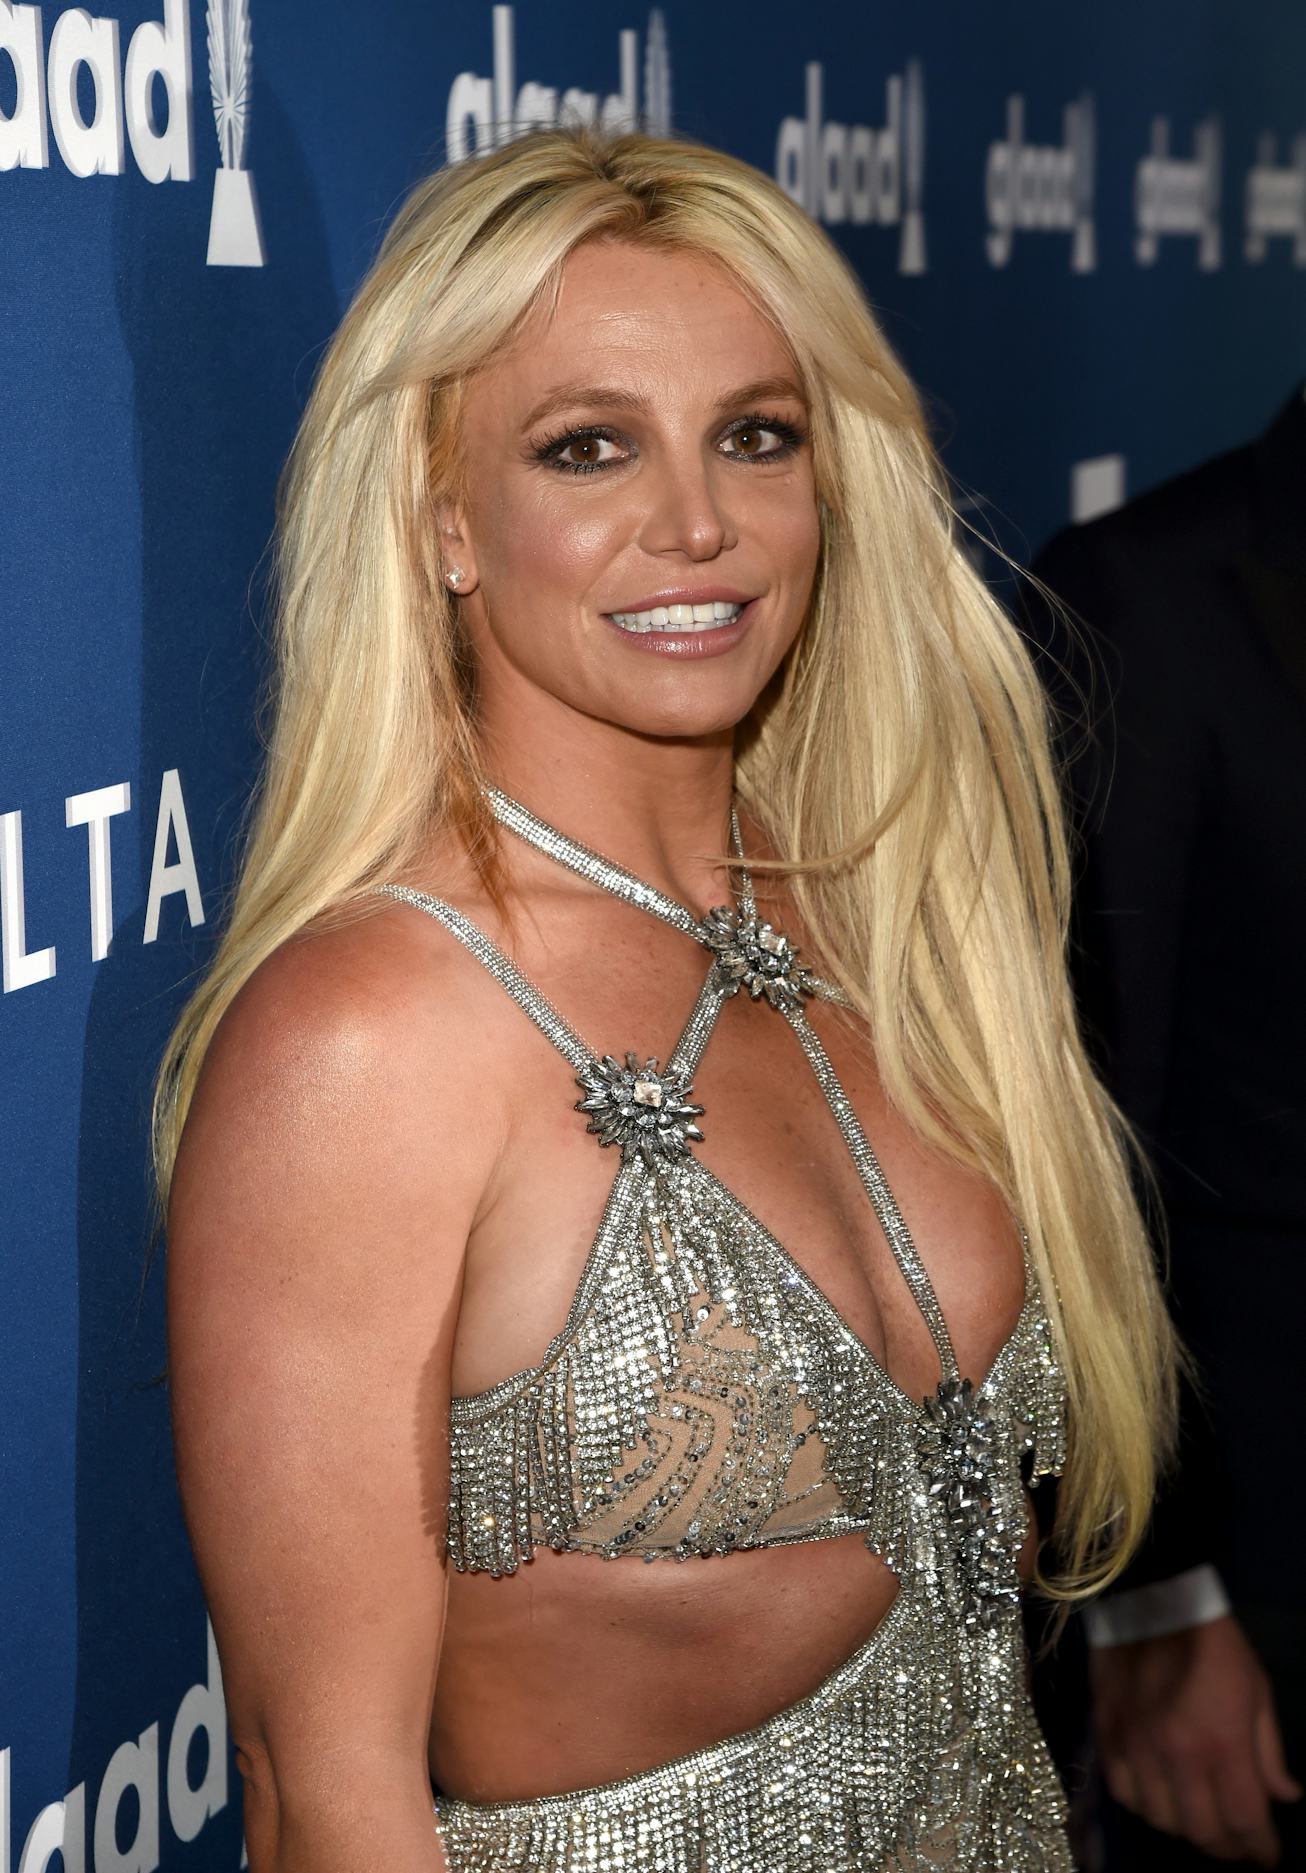 Netflix dropped the first trailer for its Britney Spears documentary, 'Britney vs. Spears'